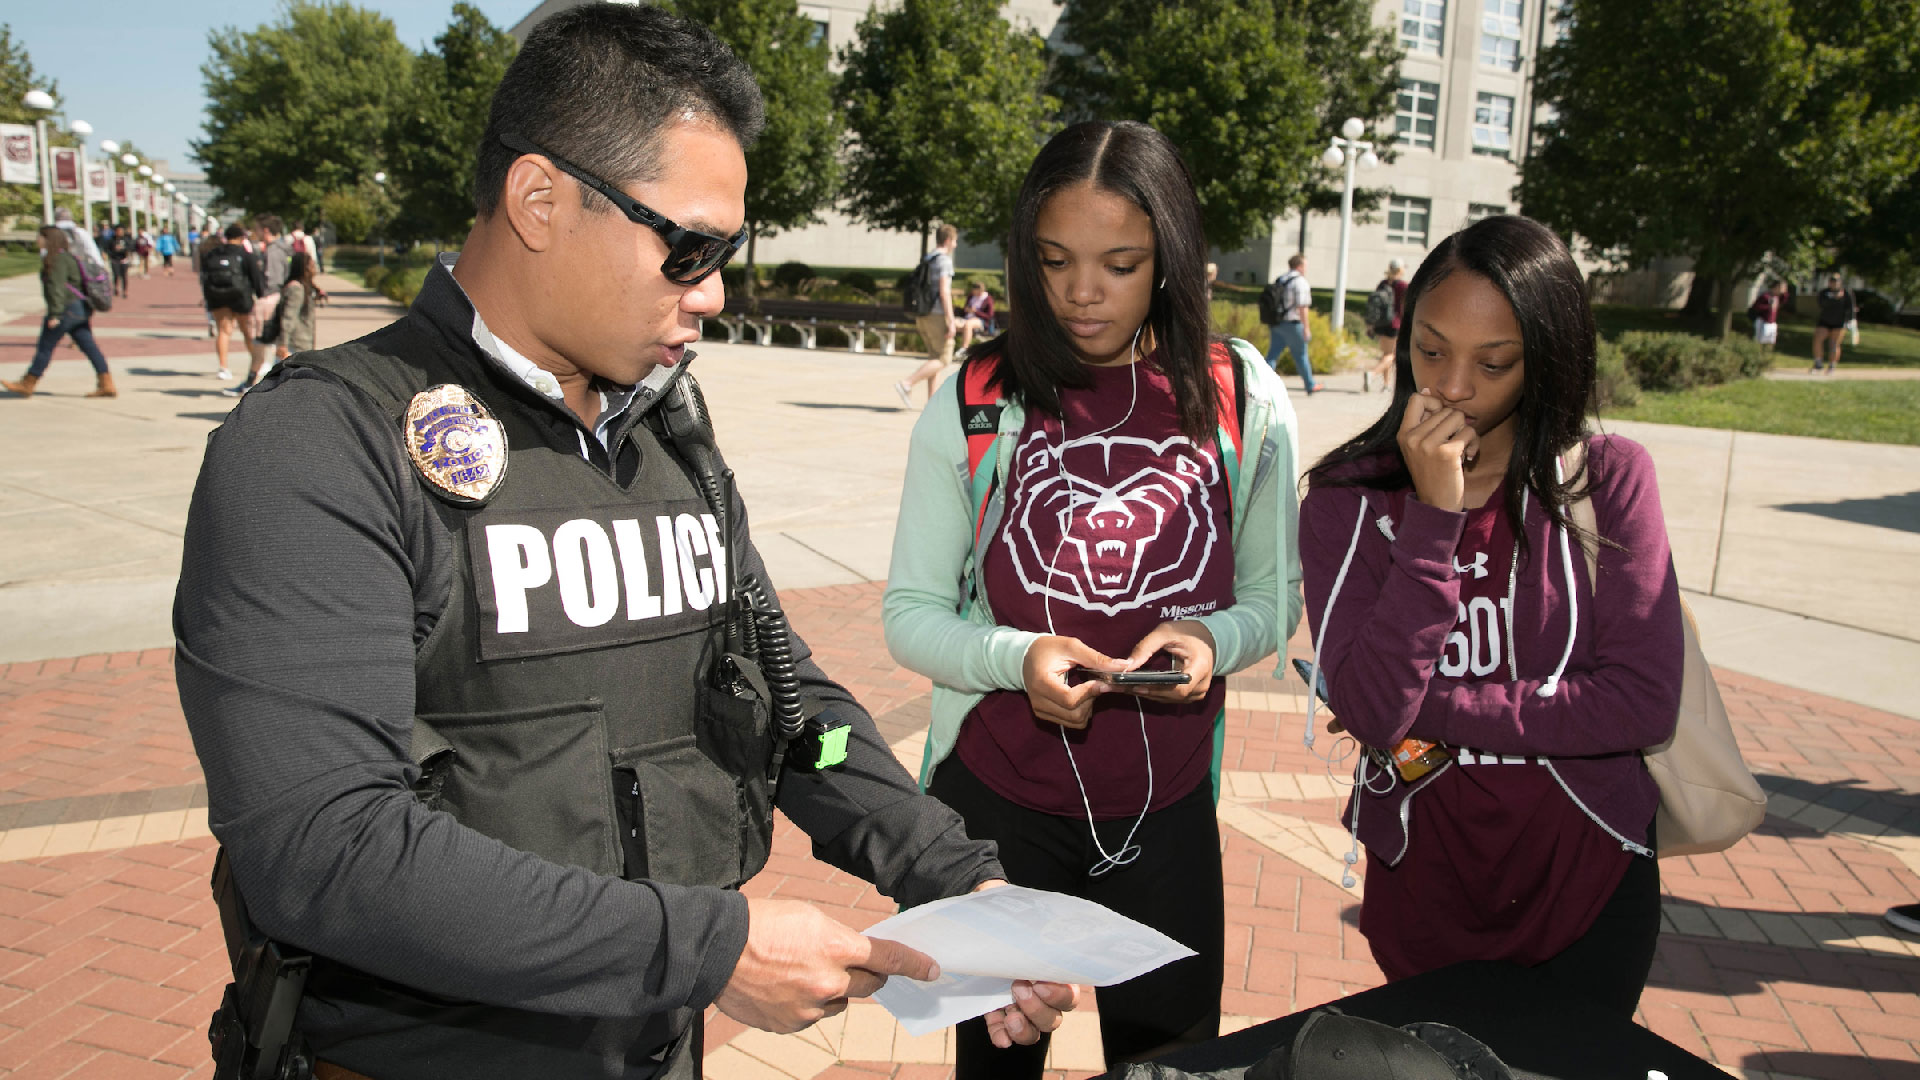 Criminology and criminal justice students talk with police officer